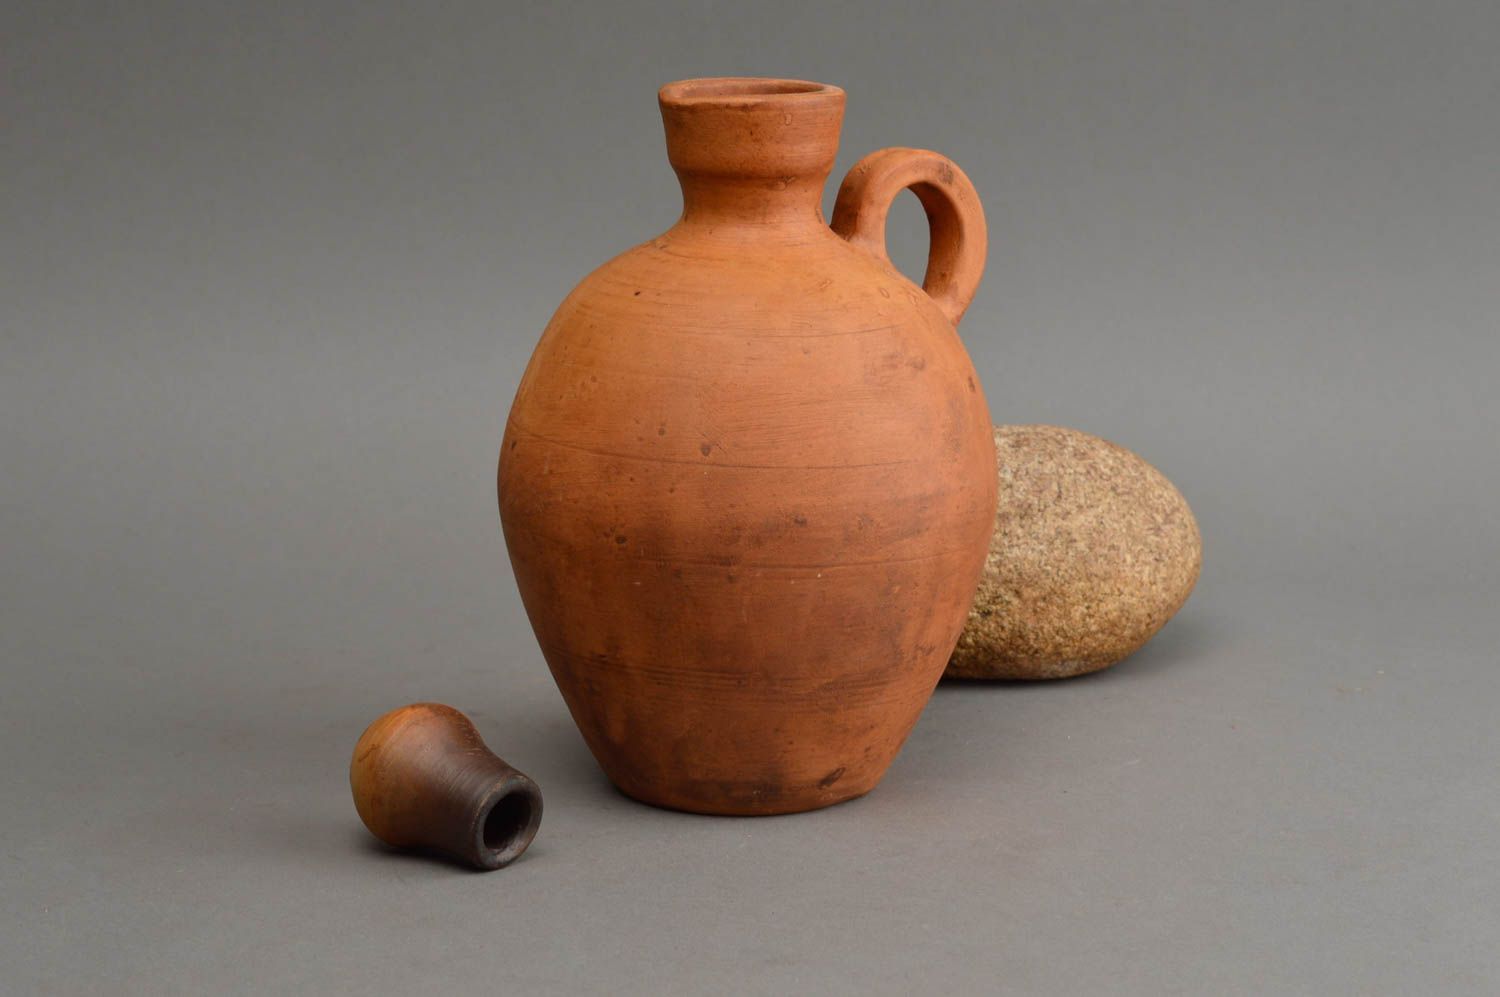 20 oz ceramic terracotta color ancient style wine jug with handle and lid 1,15 lb
 photo 1